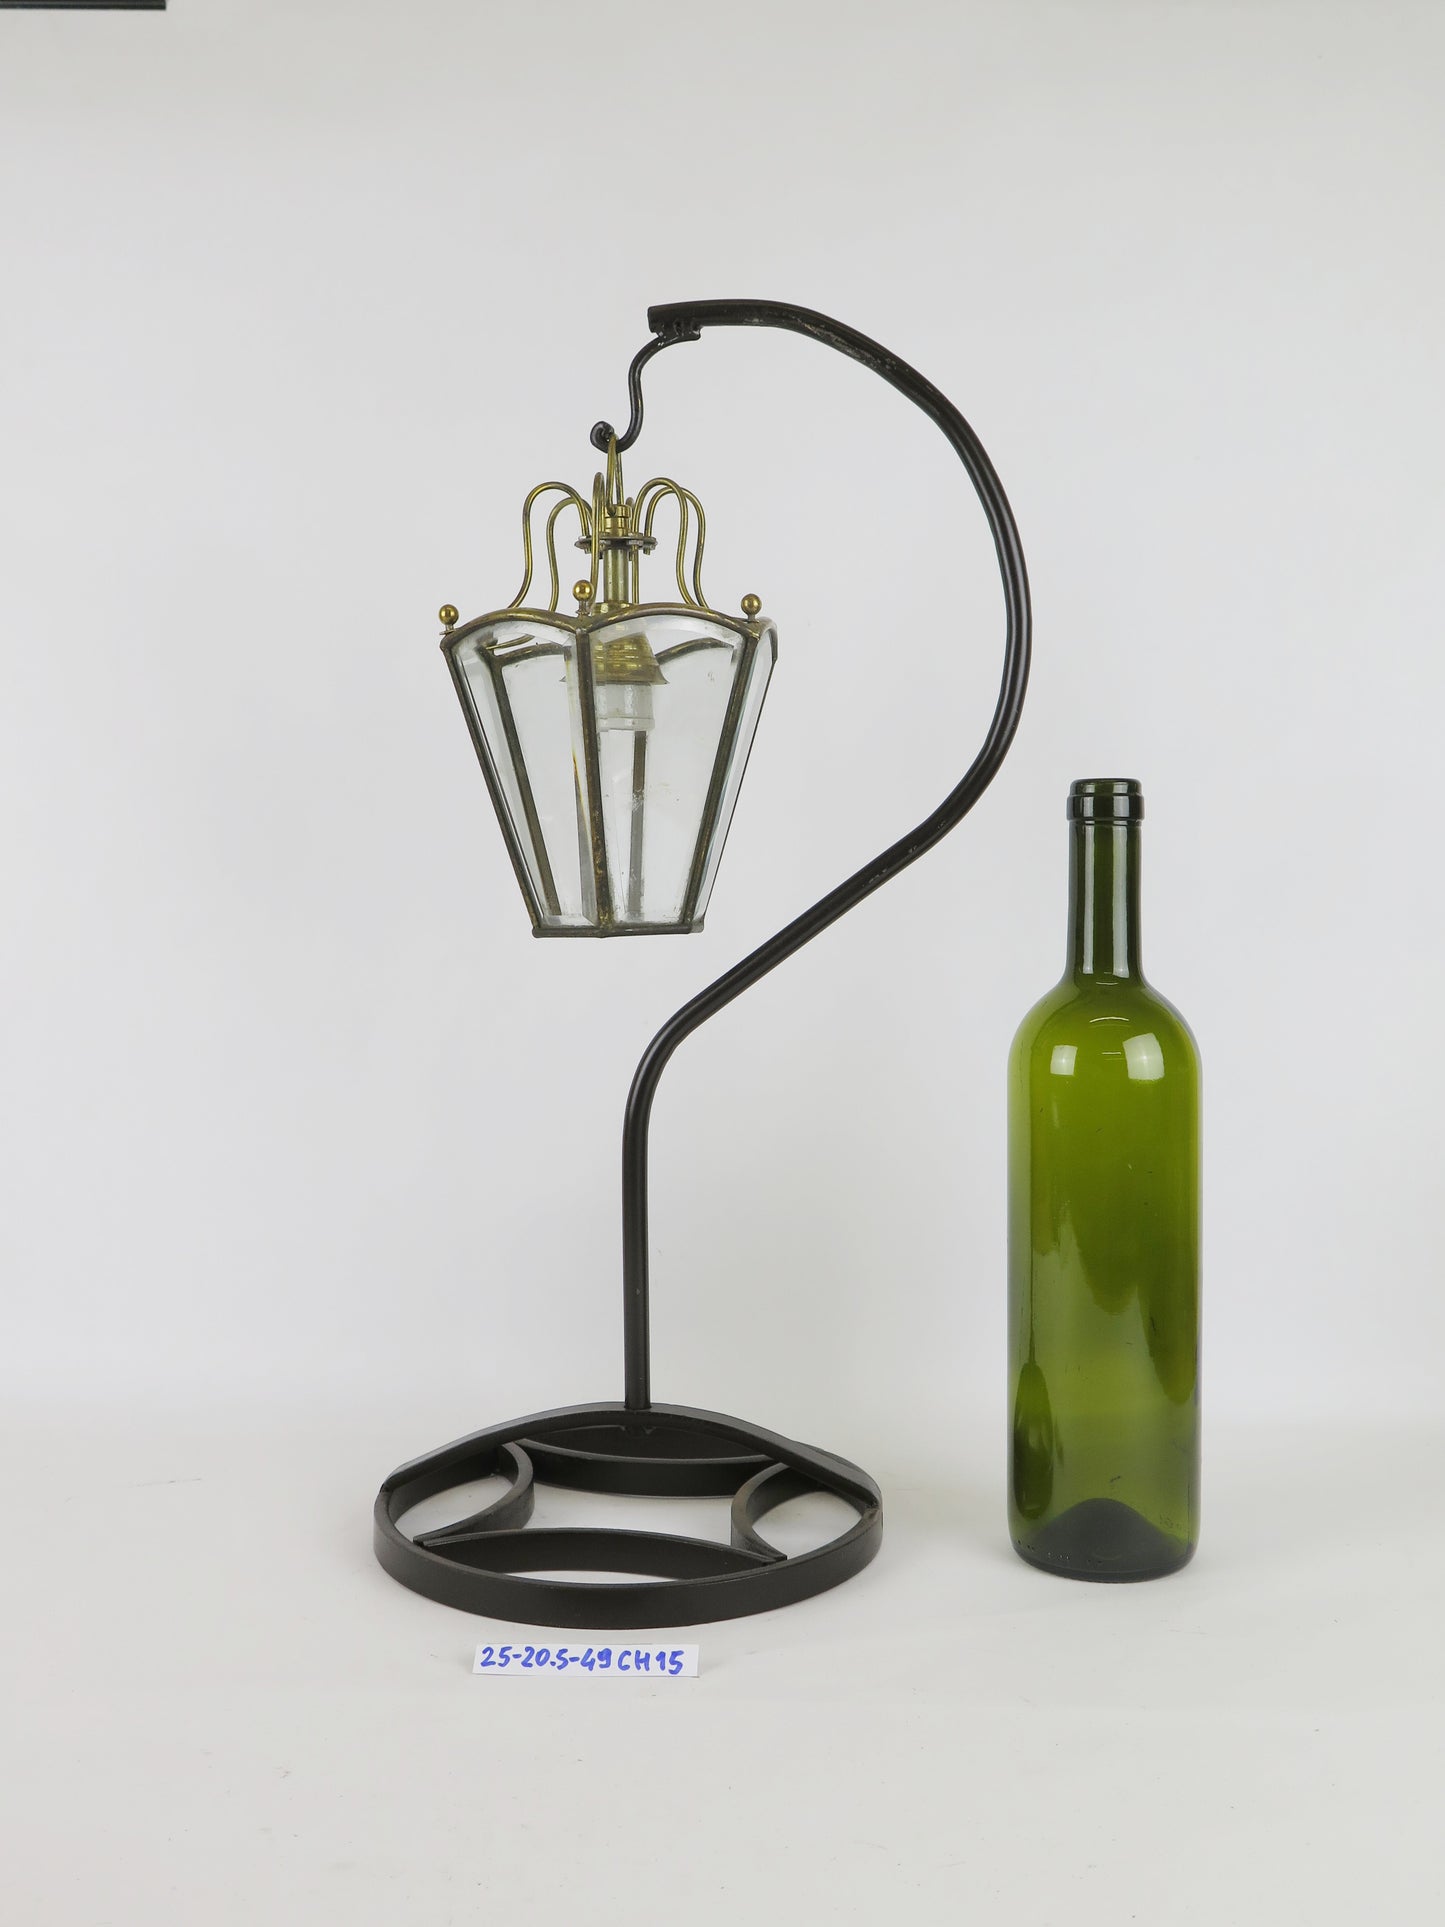 TABLE LAMP IN METAL AND WROUGHT IRON VINTAGE CIRCULAR DESIGN ARTE CH15